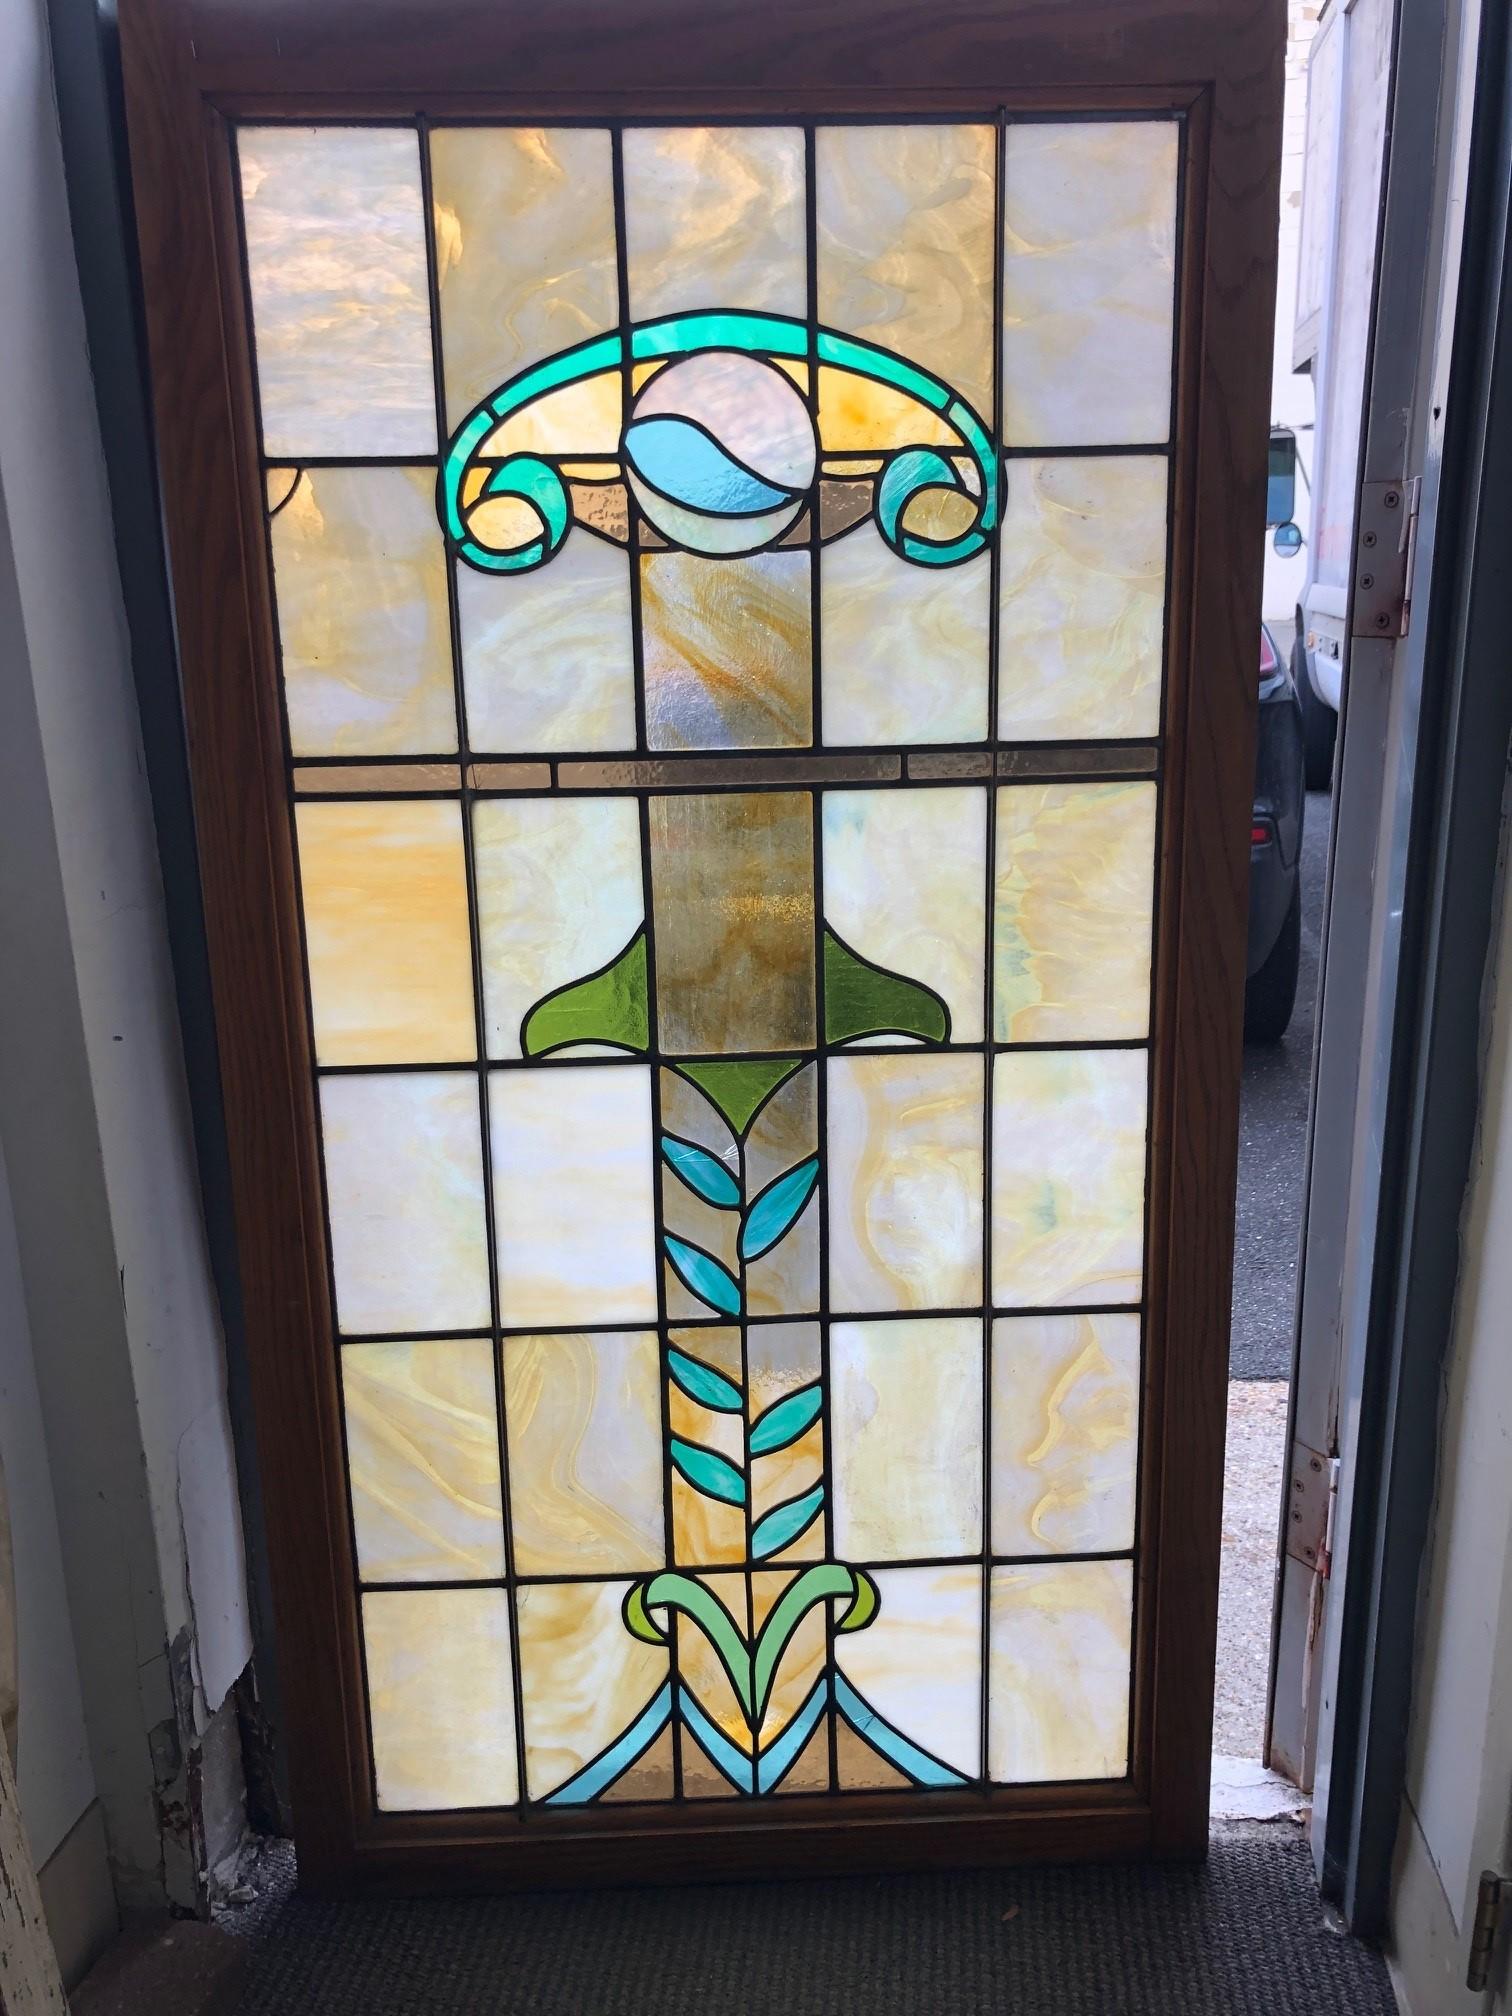 Mid 20th Century stained glass window in a oak frame. This is a very nice window with simply designs and colors which looks great in the light. The window does have a five small breaks but is overall in good shape and very sturdy, this window is